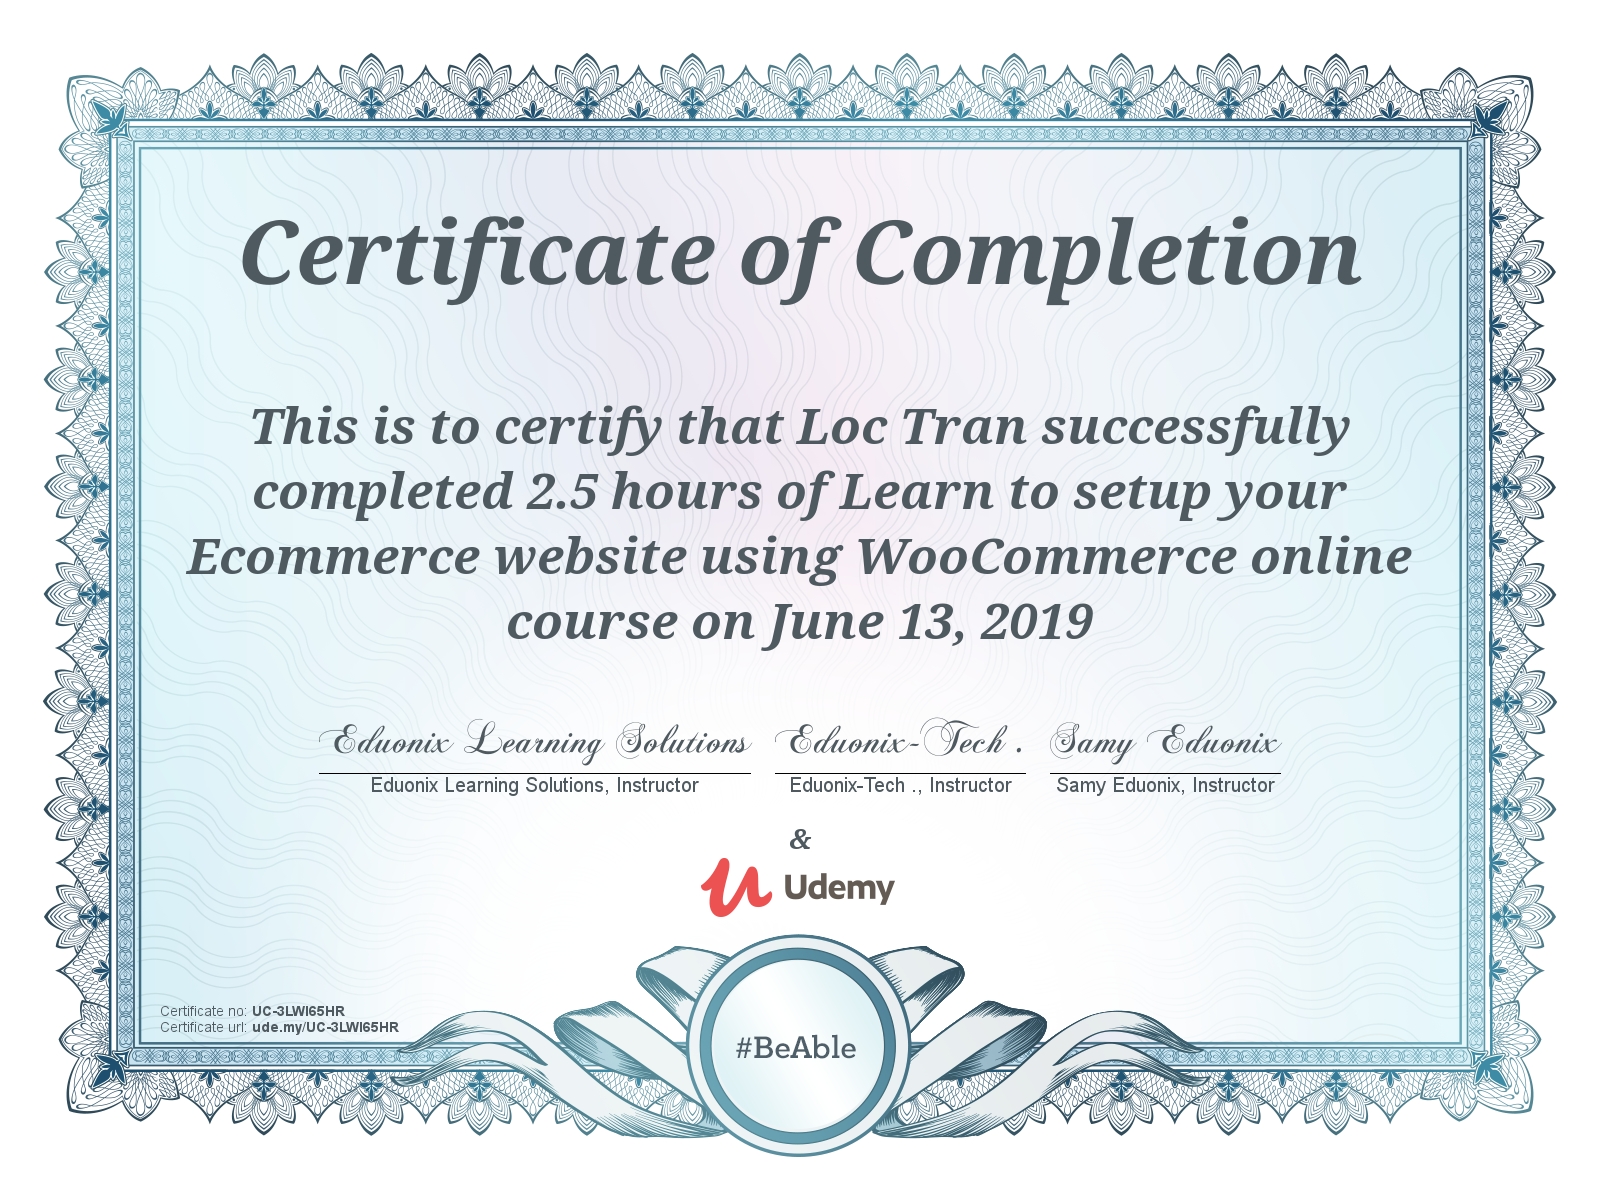 Learn to setup your Ecommerce website using WooCommerce